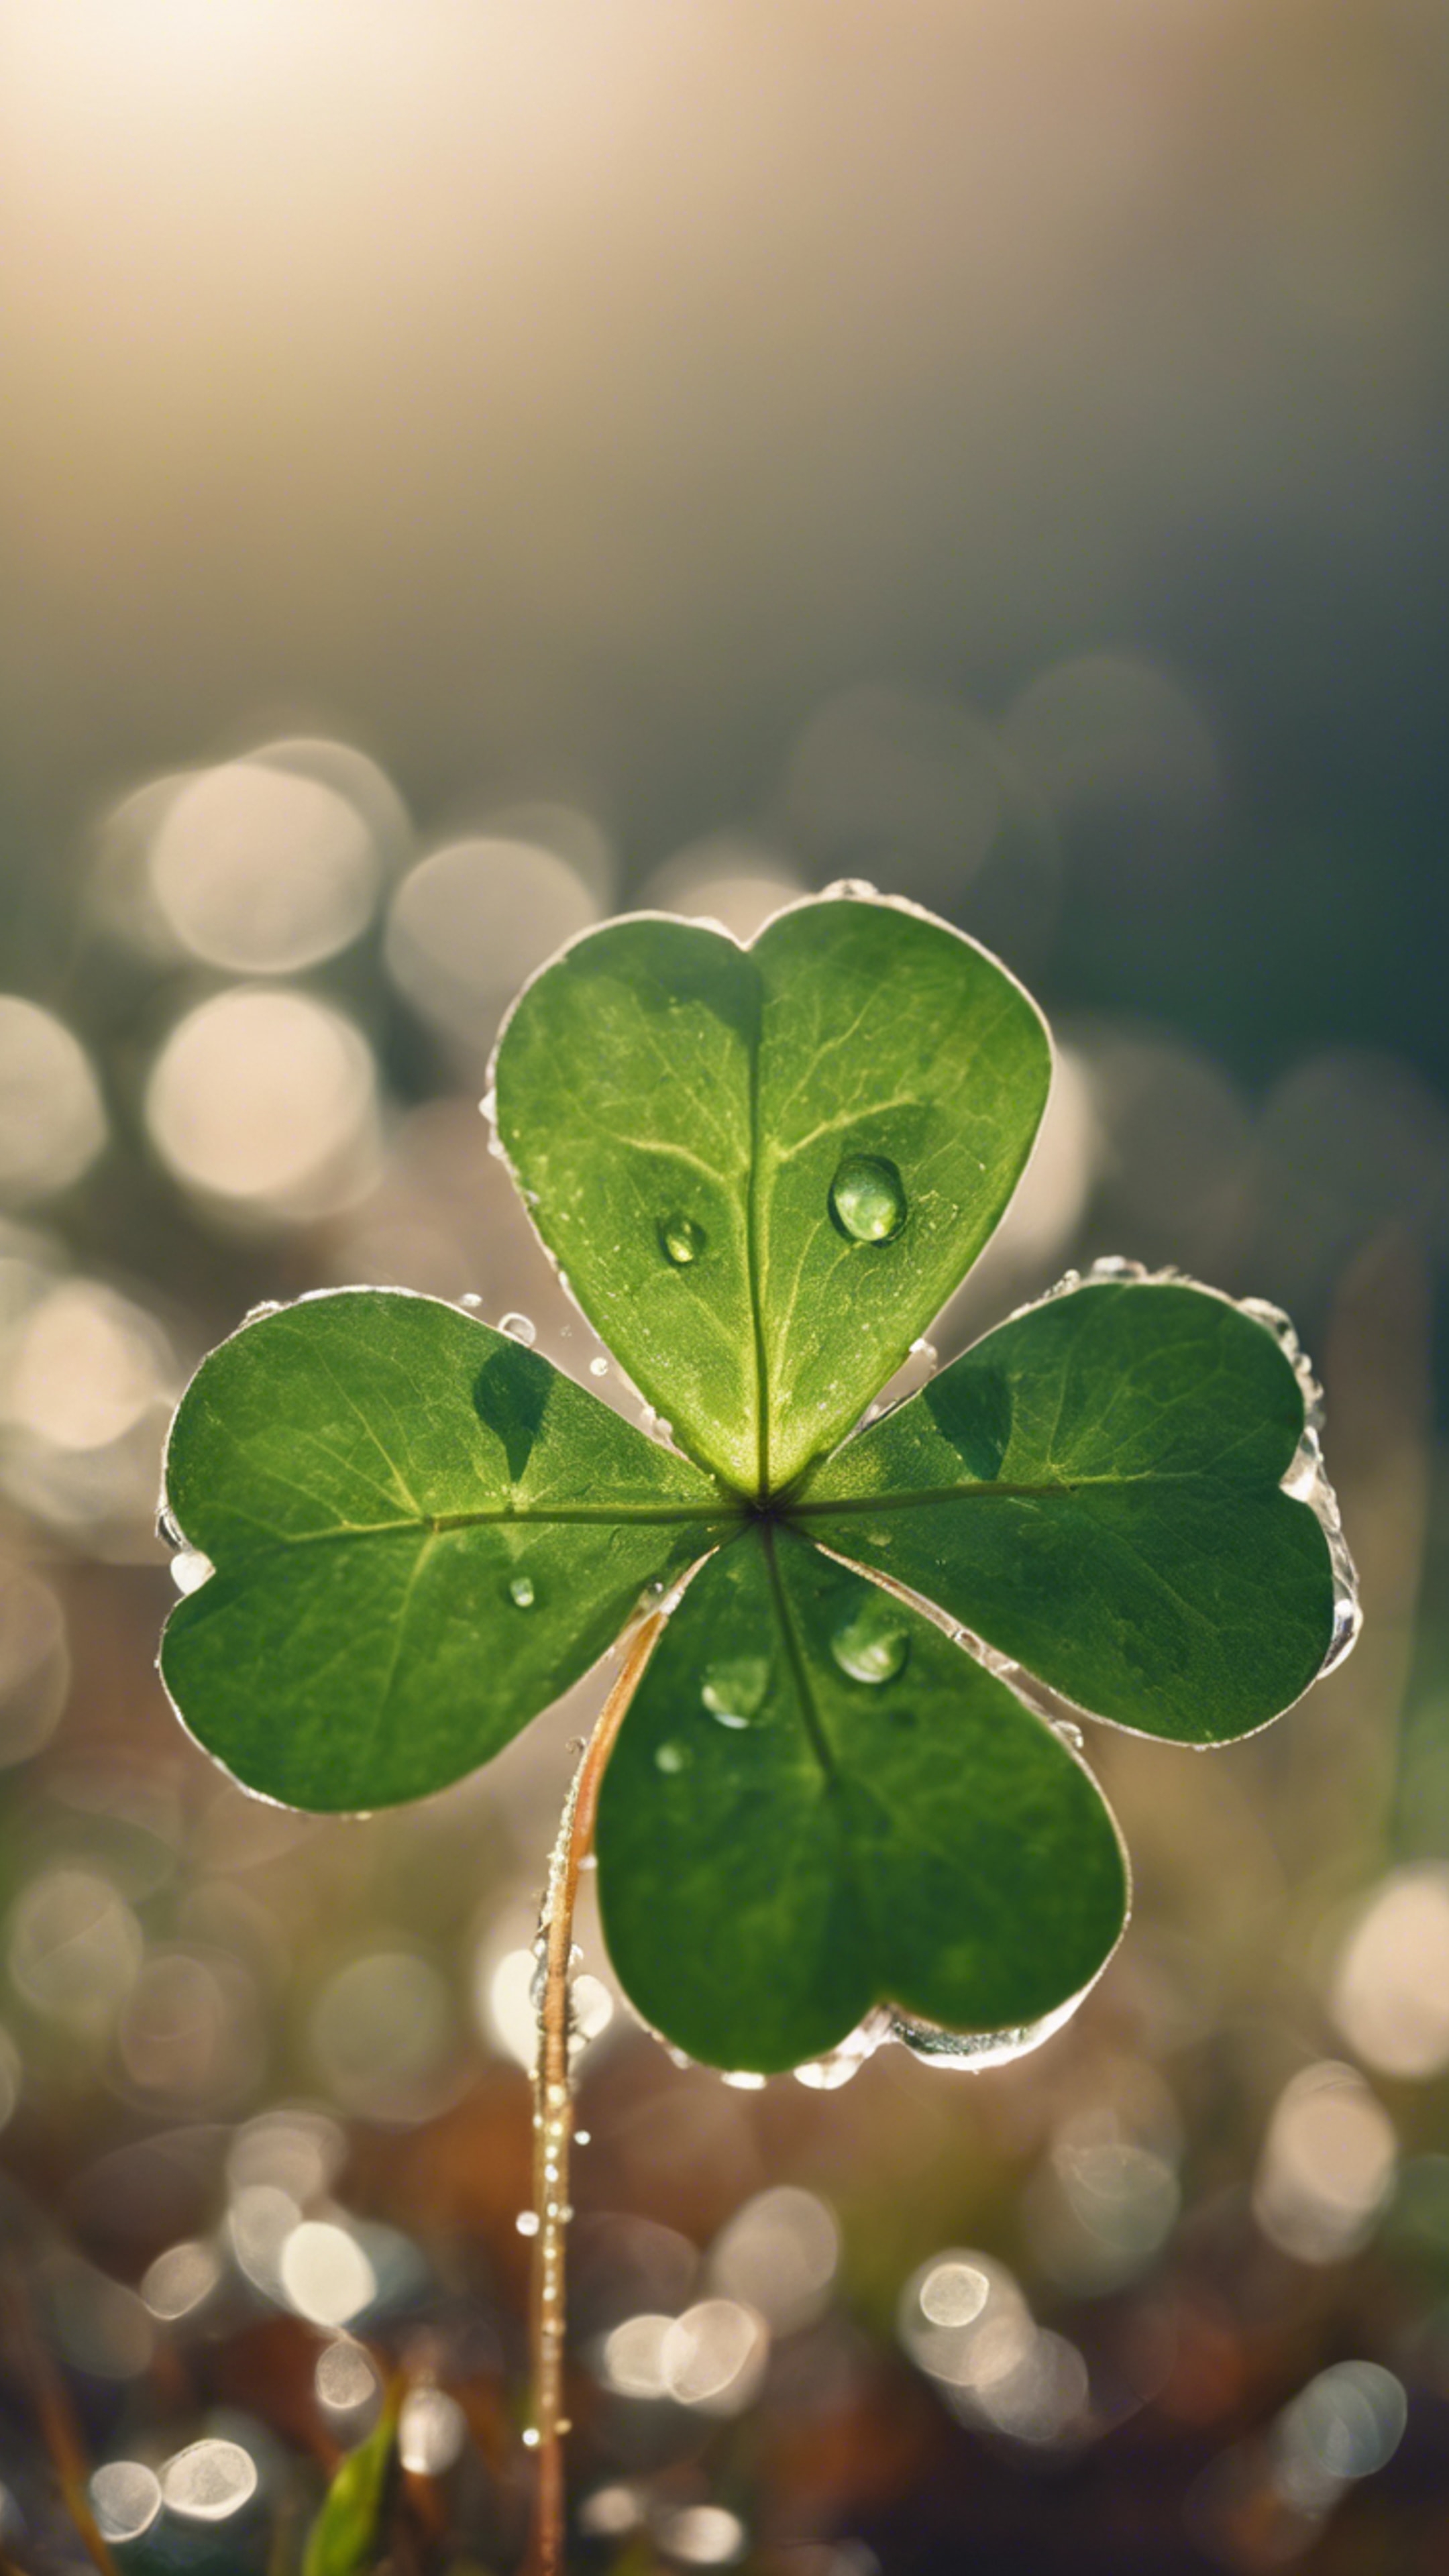 A close-up view of a four leaf clover gleaming in the morning dew. Taustakuva[b8d84a1222284df192e8]